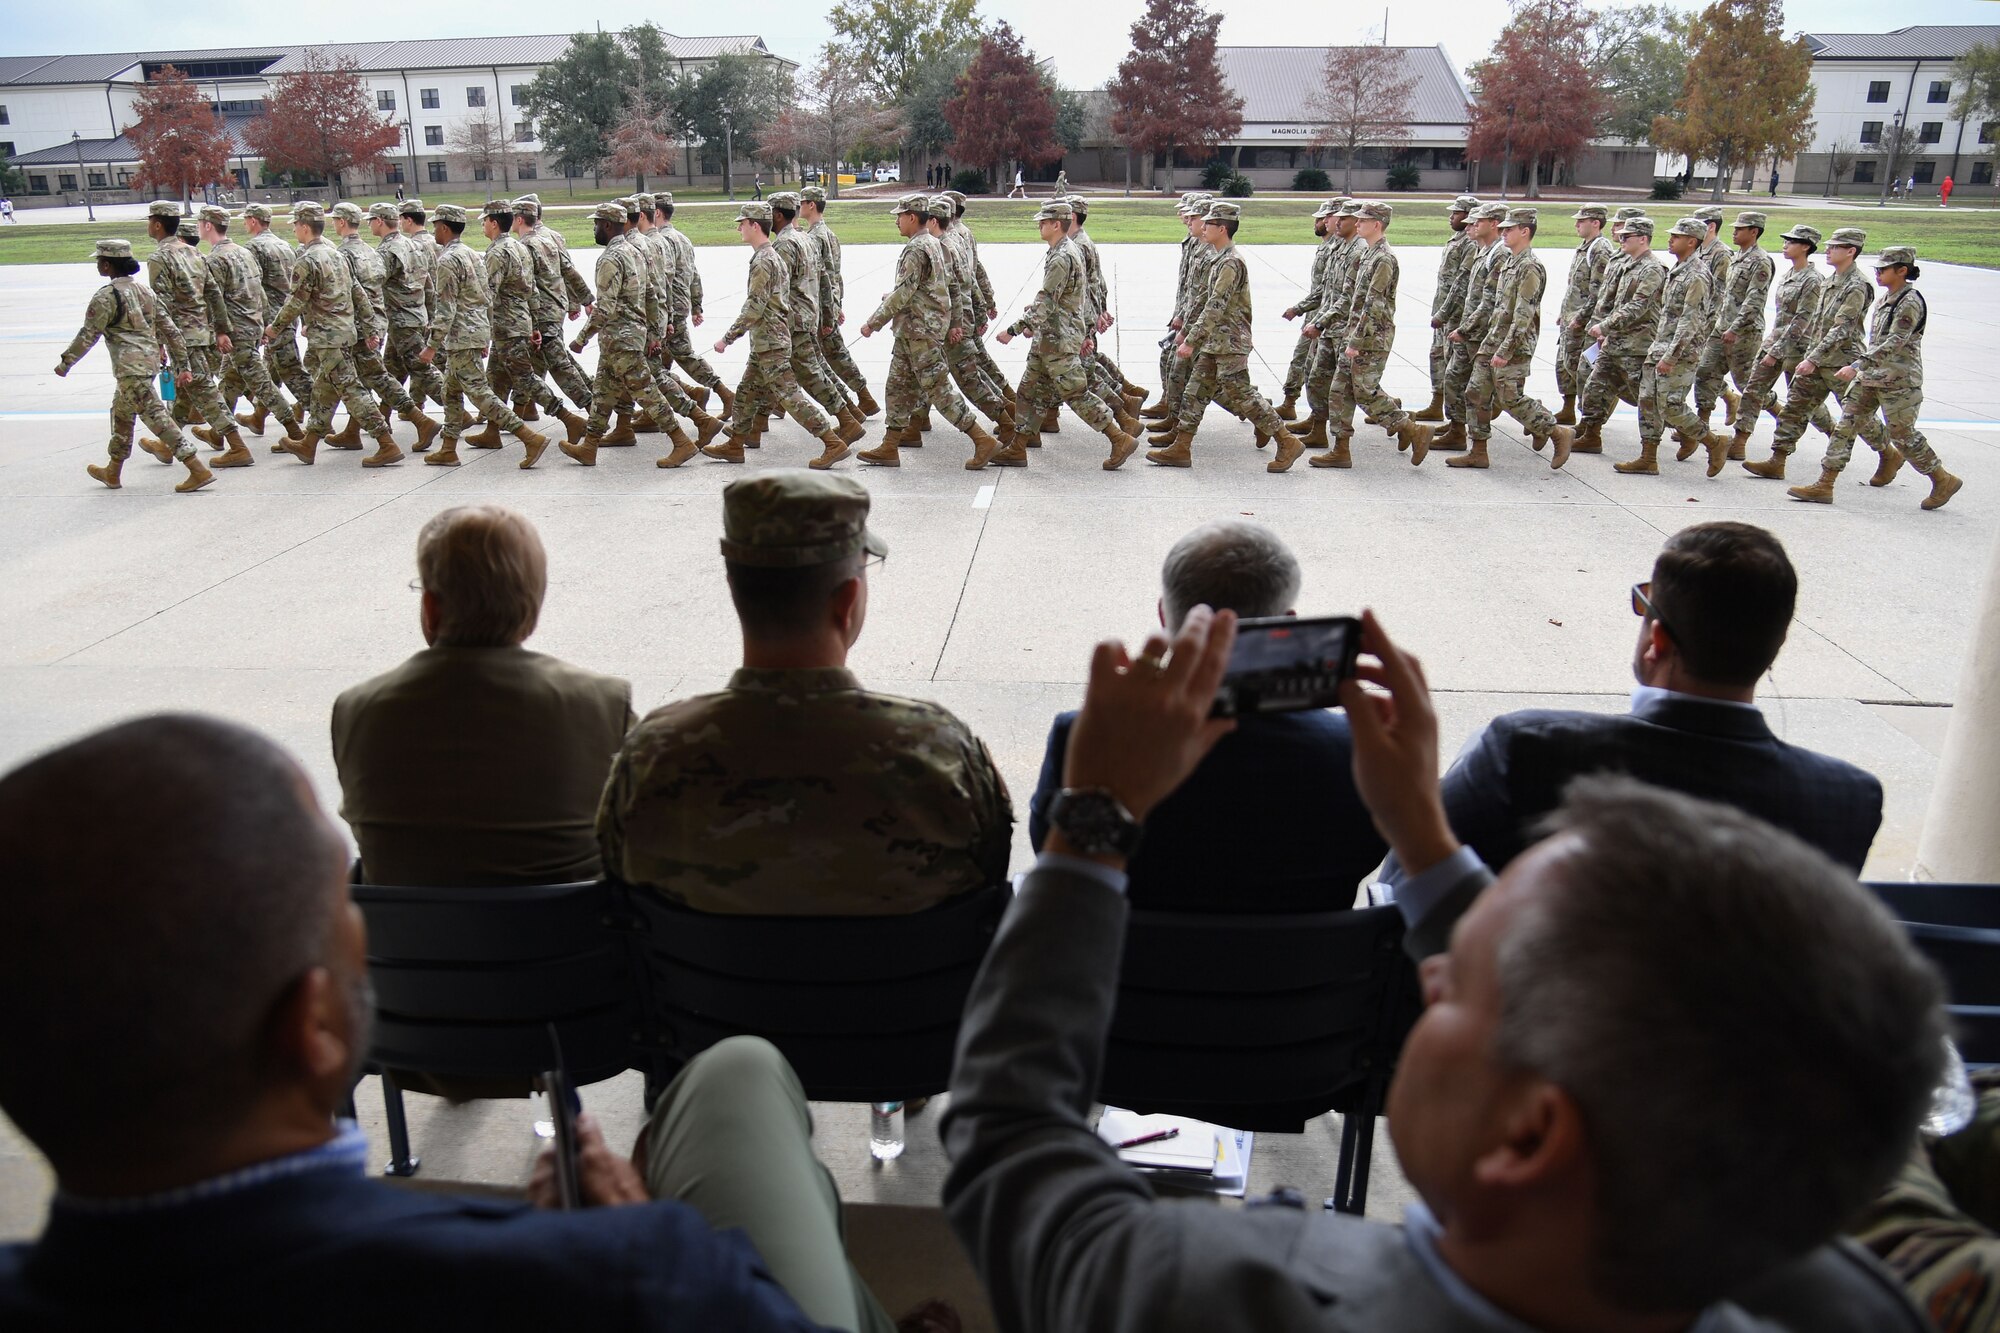 State and local civic leaders watch Airmen from the 81st Training Group march by during A Day At Keesler outside the Levitow Training Support Facility at Keesler Air Force Base, Mississippi, Dec. 9, 2022.